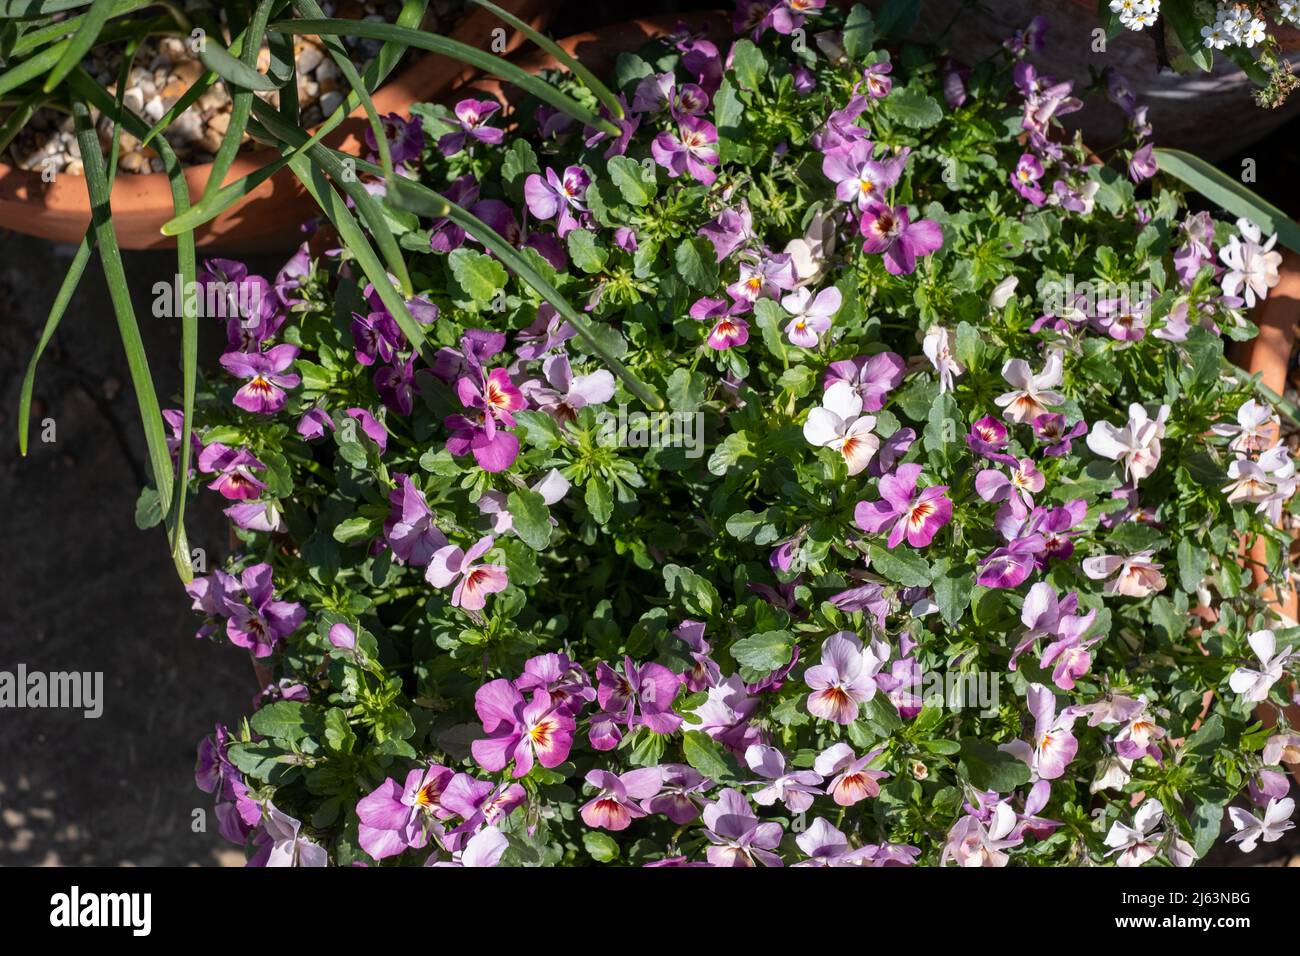 Flower pots filled to overflowing with colourful pink purple viola flowers. Photographed at RHS Wisley garden, near Woking in Surrey UK. Stock Photo